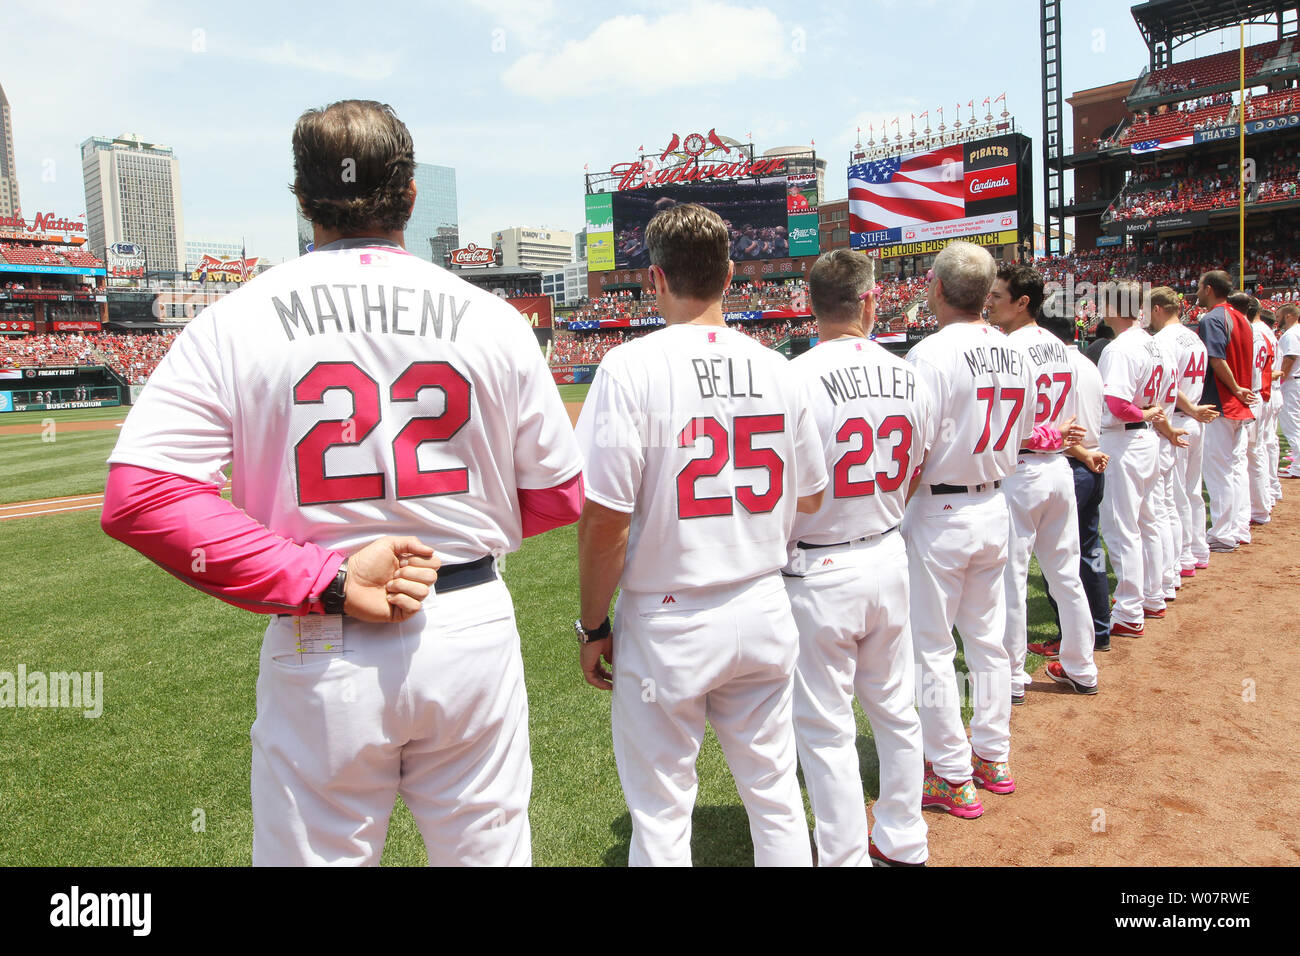 St. Louis Cardinals stand for the National Anthem, wearing pink